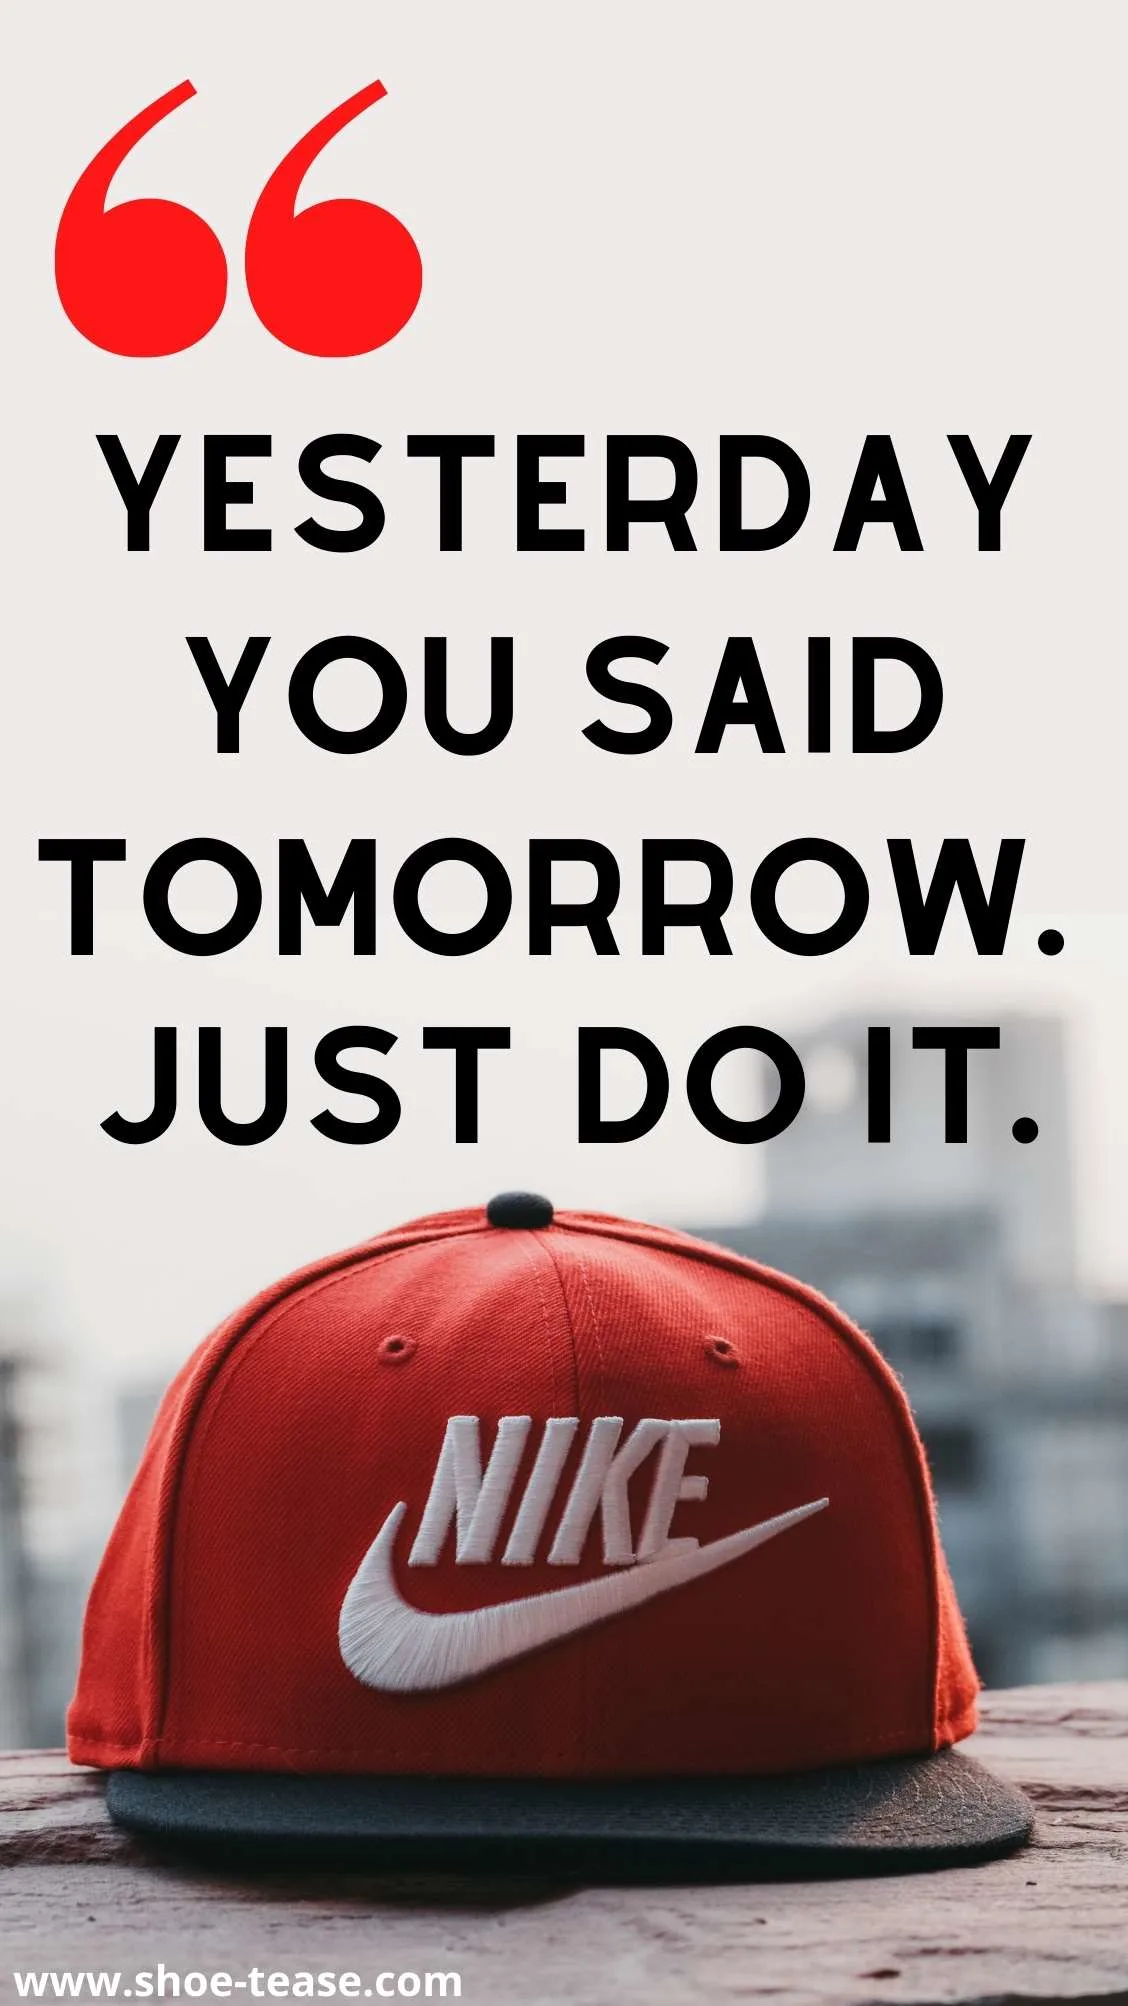 Plausible charla Puede ser ignorado Over 100 Best Nike Quotes, Motivational Slogans and Sayings about Nike